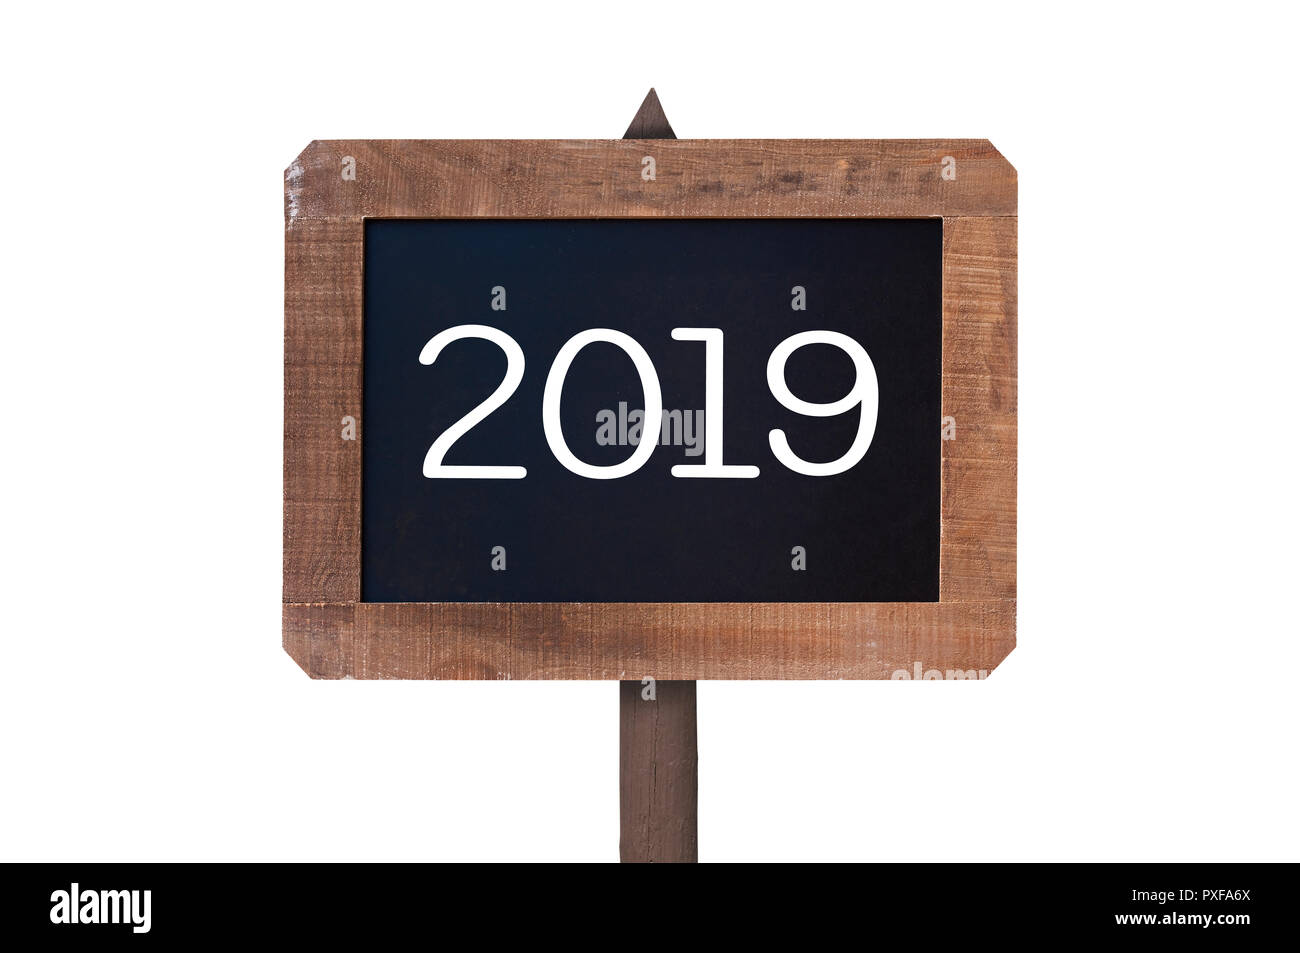 2019 written on a vintage wooden post sign isolated on white background Stock Photo